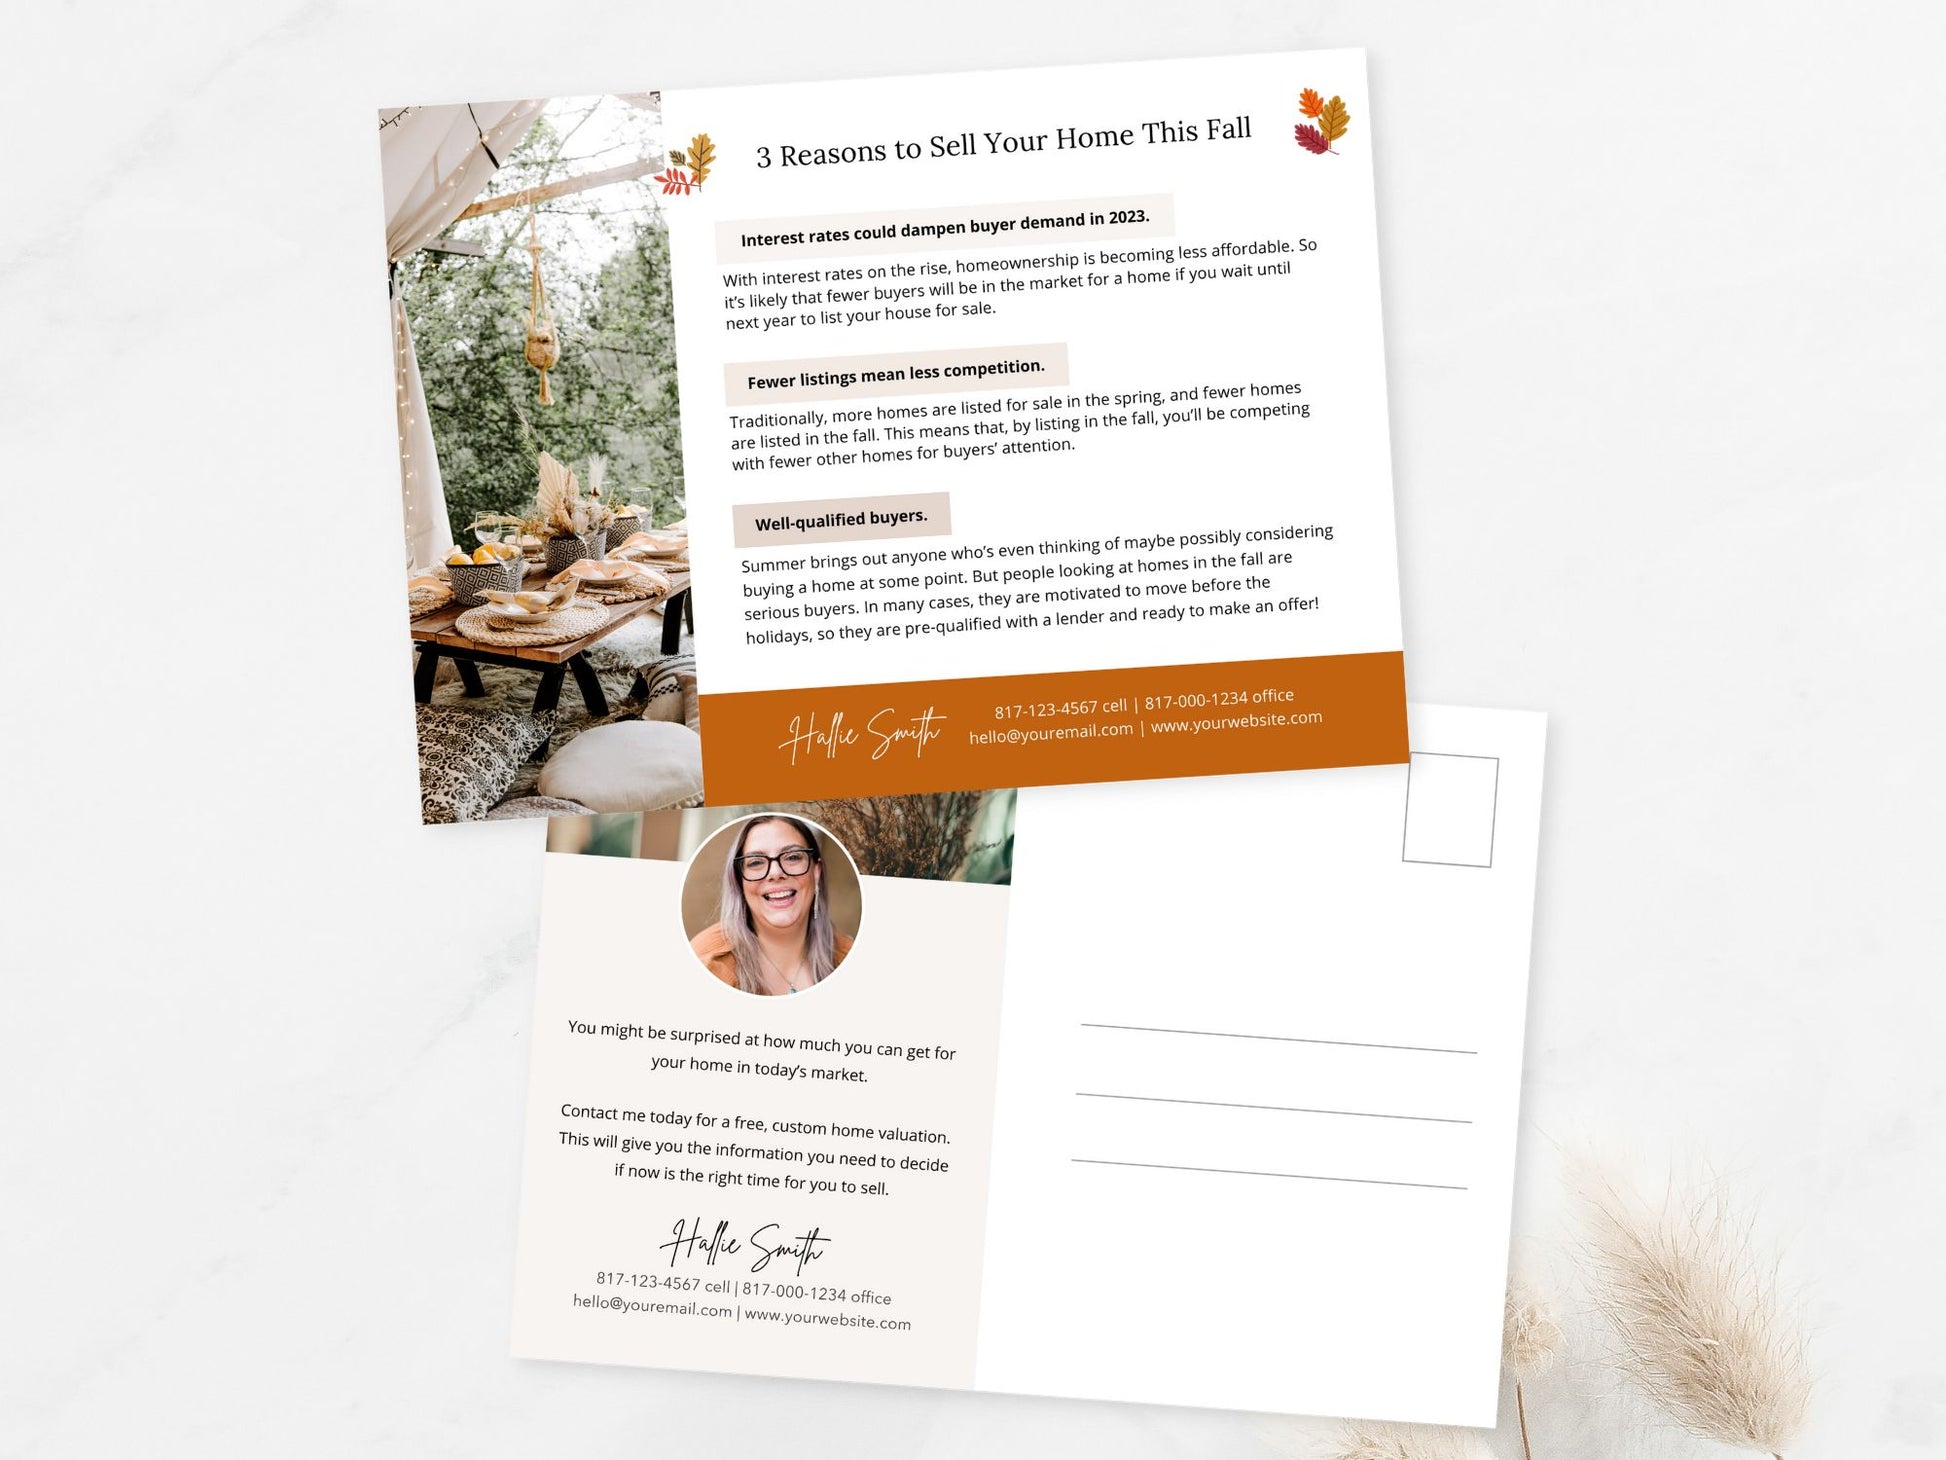 Real Estate Fall Postcard - Beautifully designed postcard capturing the essence of fall, bringing the warmth of autumn to client communications for a visually appealing and festive expression of seasonal greetings.